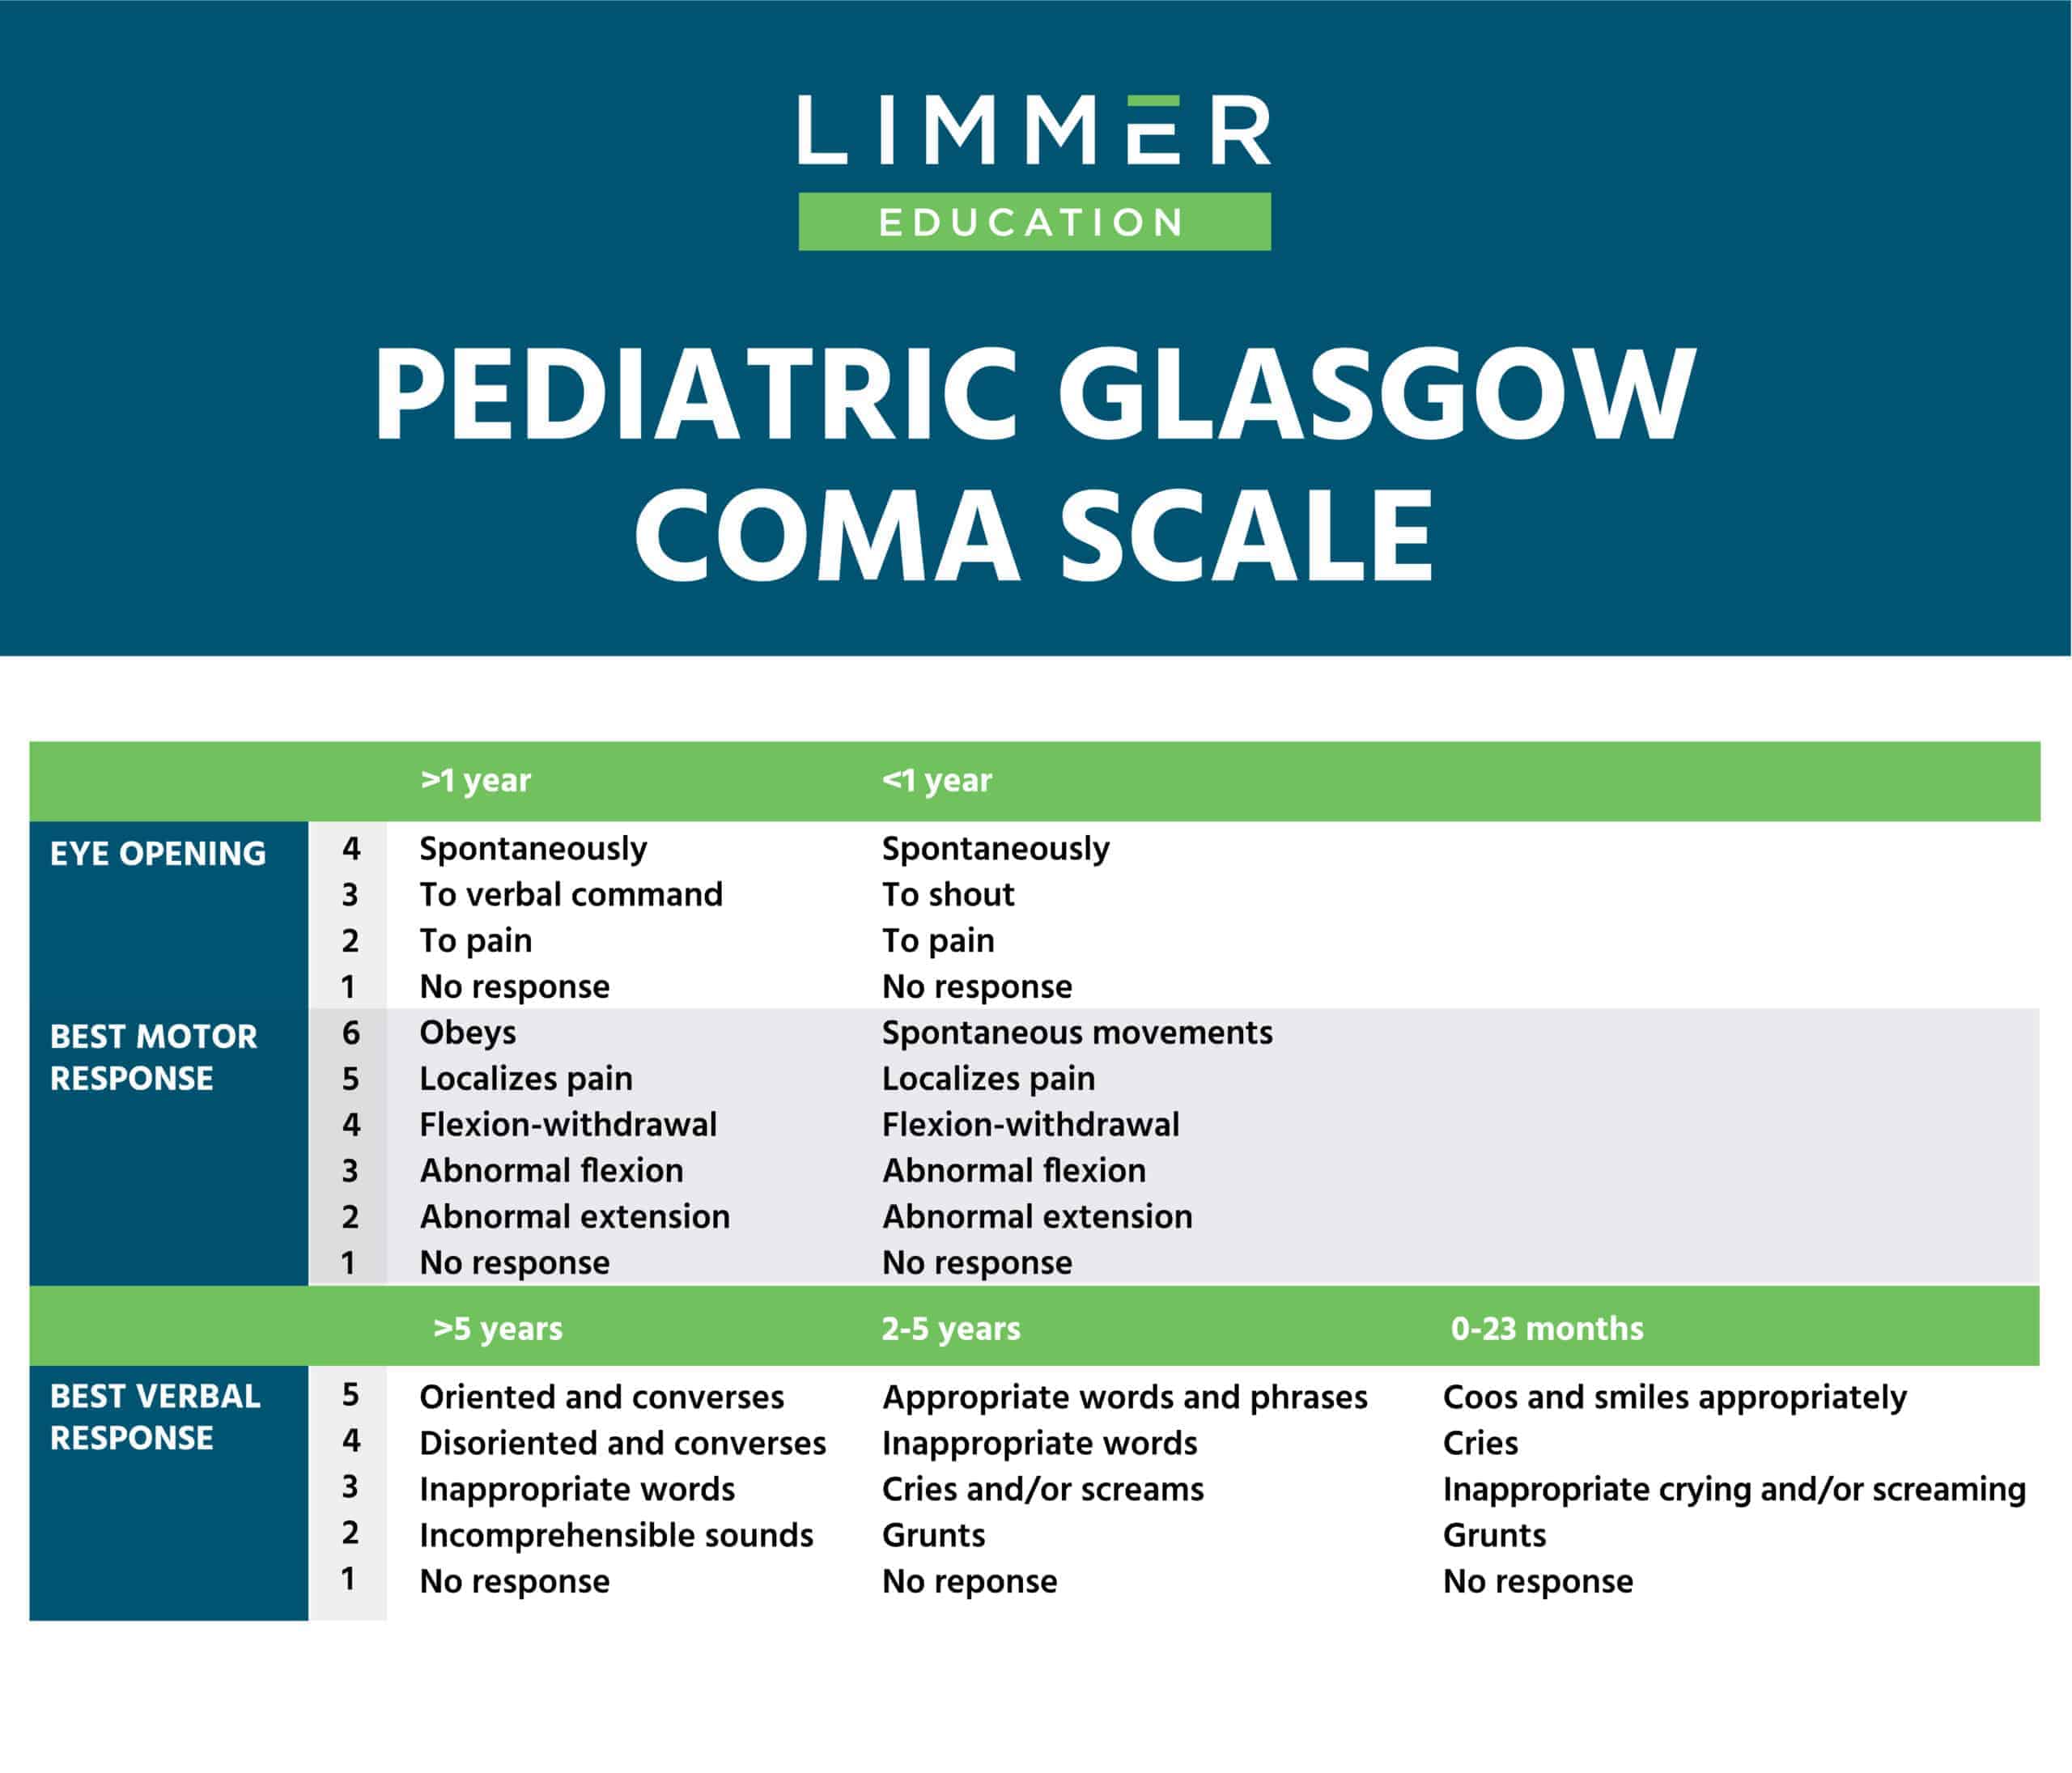 pediatric glasgow coma scale for assessing pediatric patients